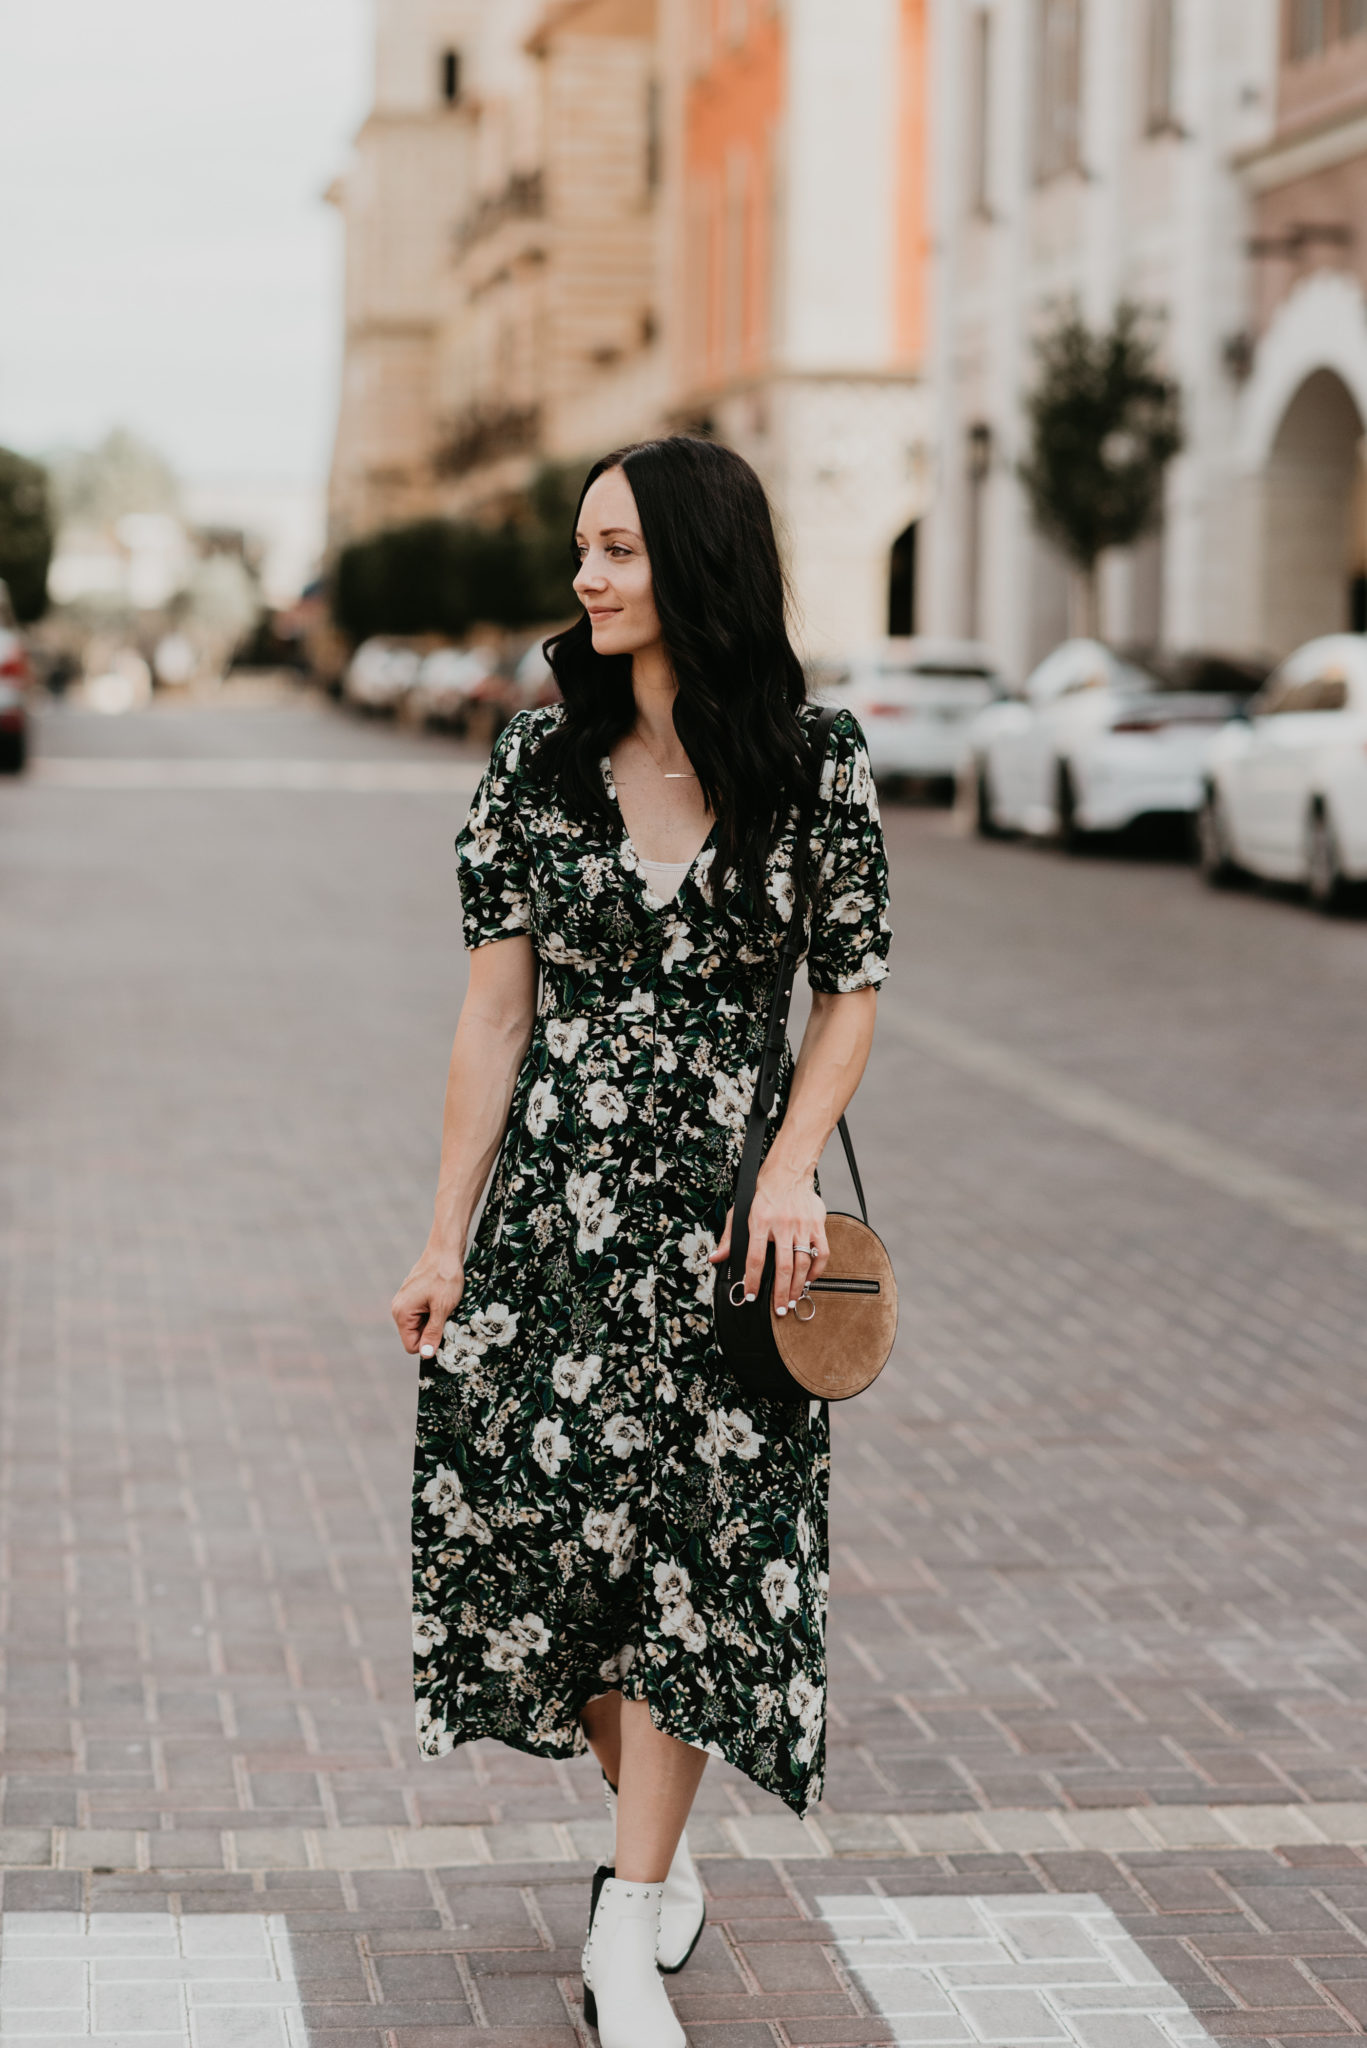 Nordstrom floral midi dress featured by popular Las Vegas fashion blogger, Outfits & Outings